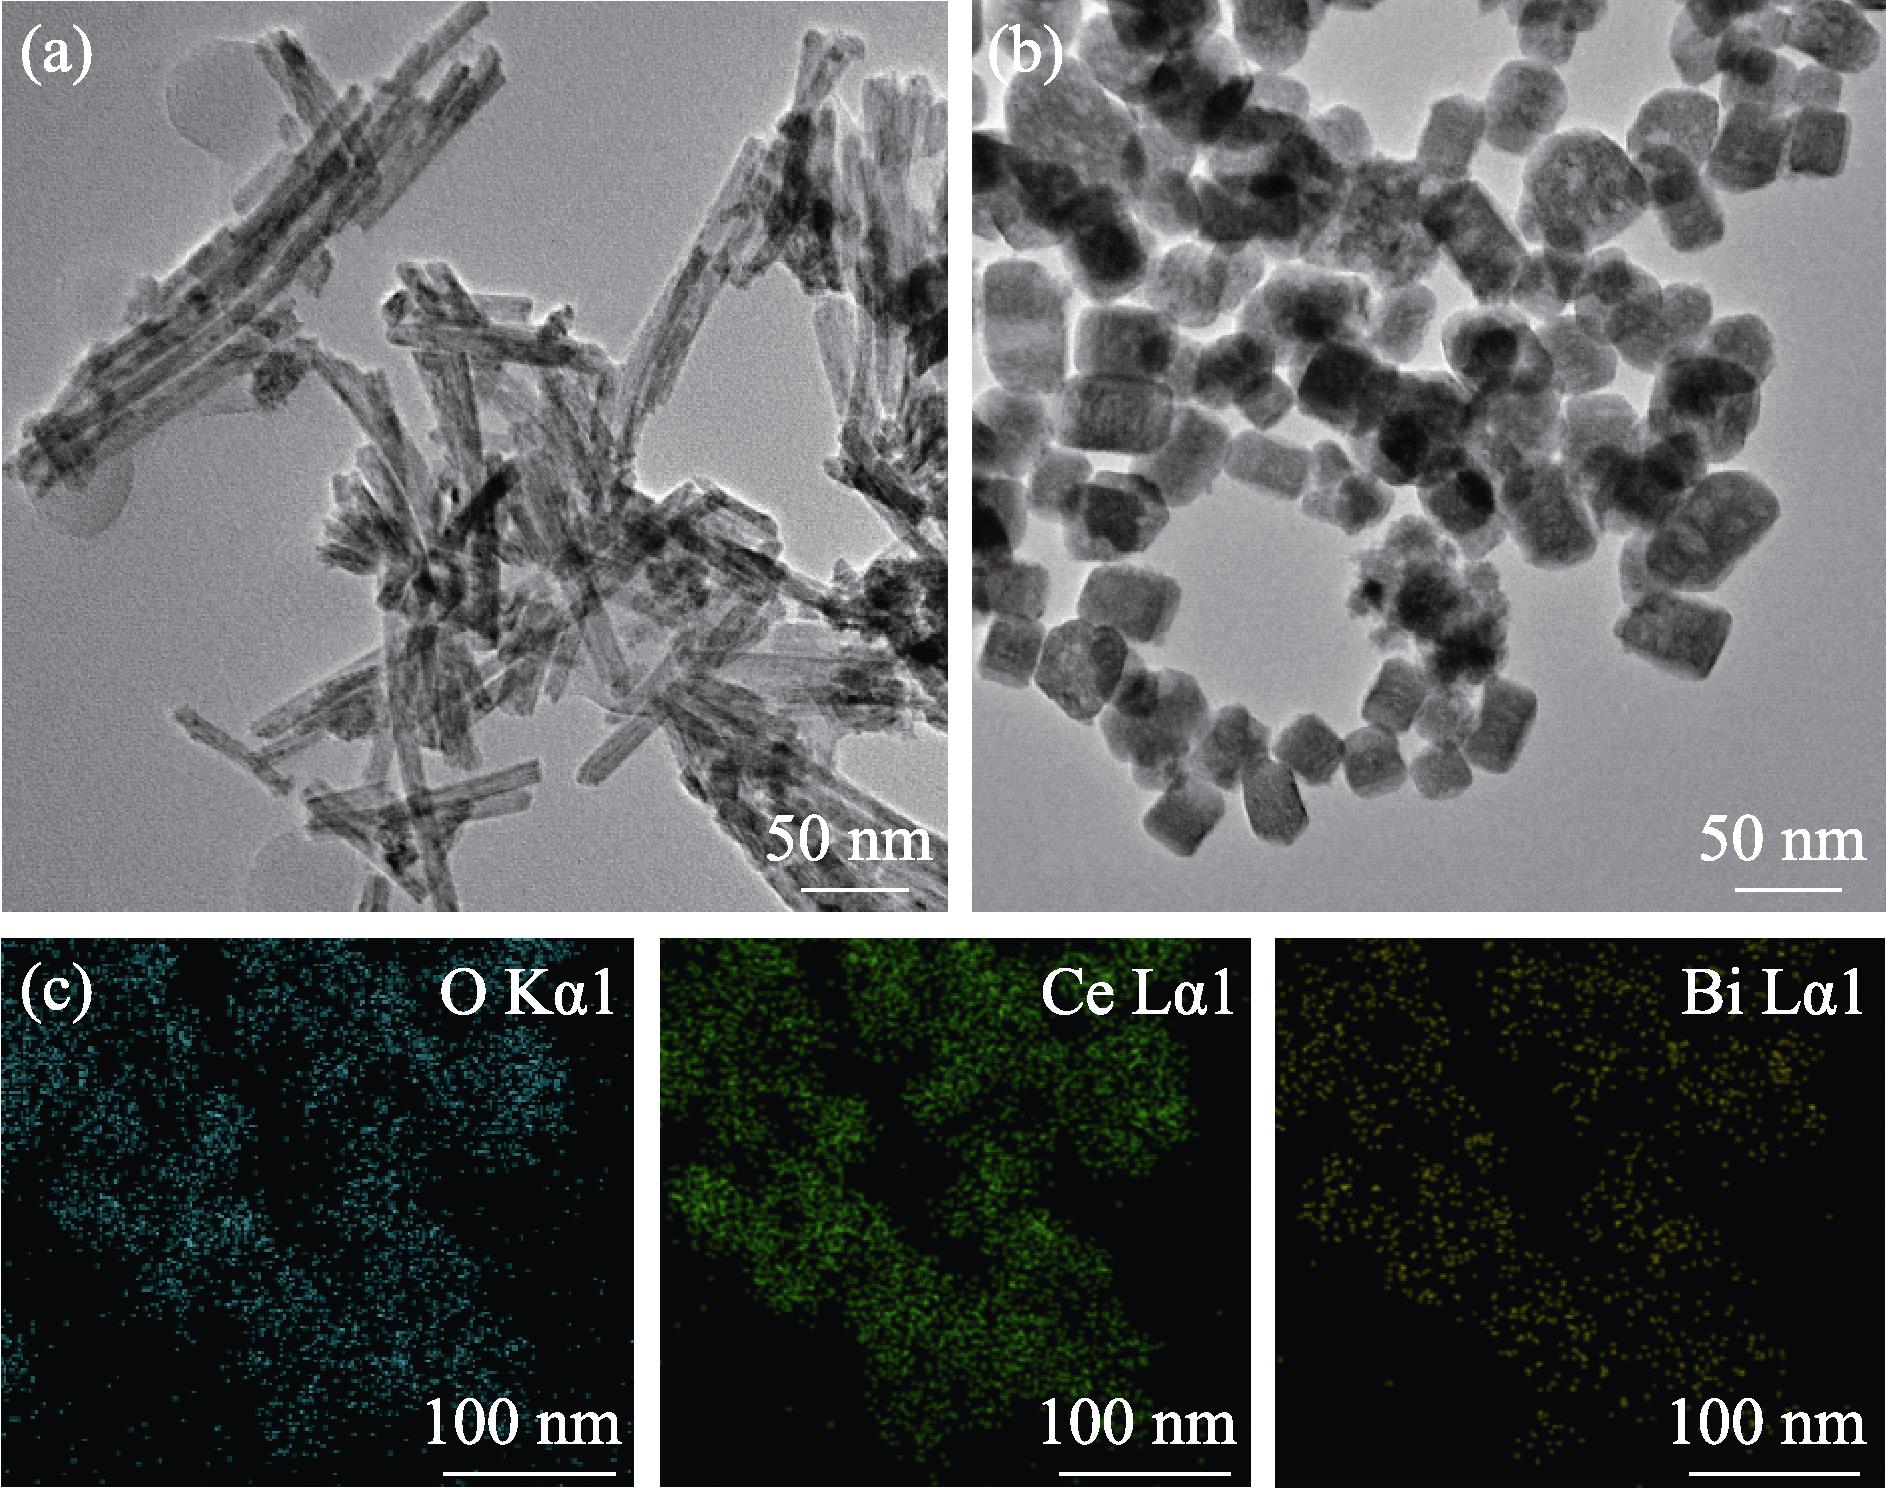 TEM images of (a) CeO2 and (b) Ce0.6Bi0.4O2-δ, (c) EDX elemental mapping images of Ce0.6Bi0.4O2-δ